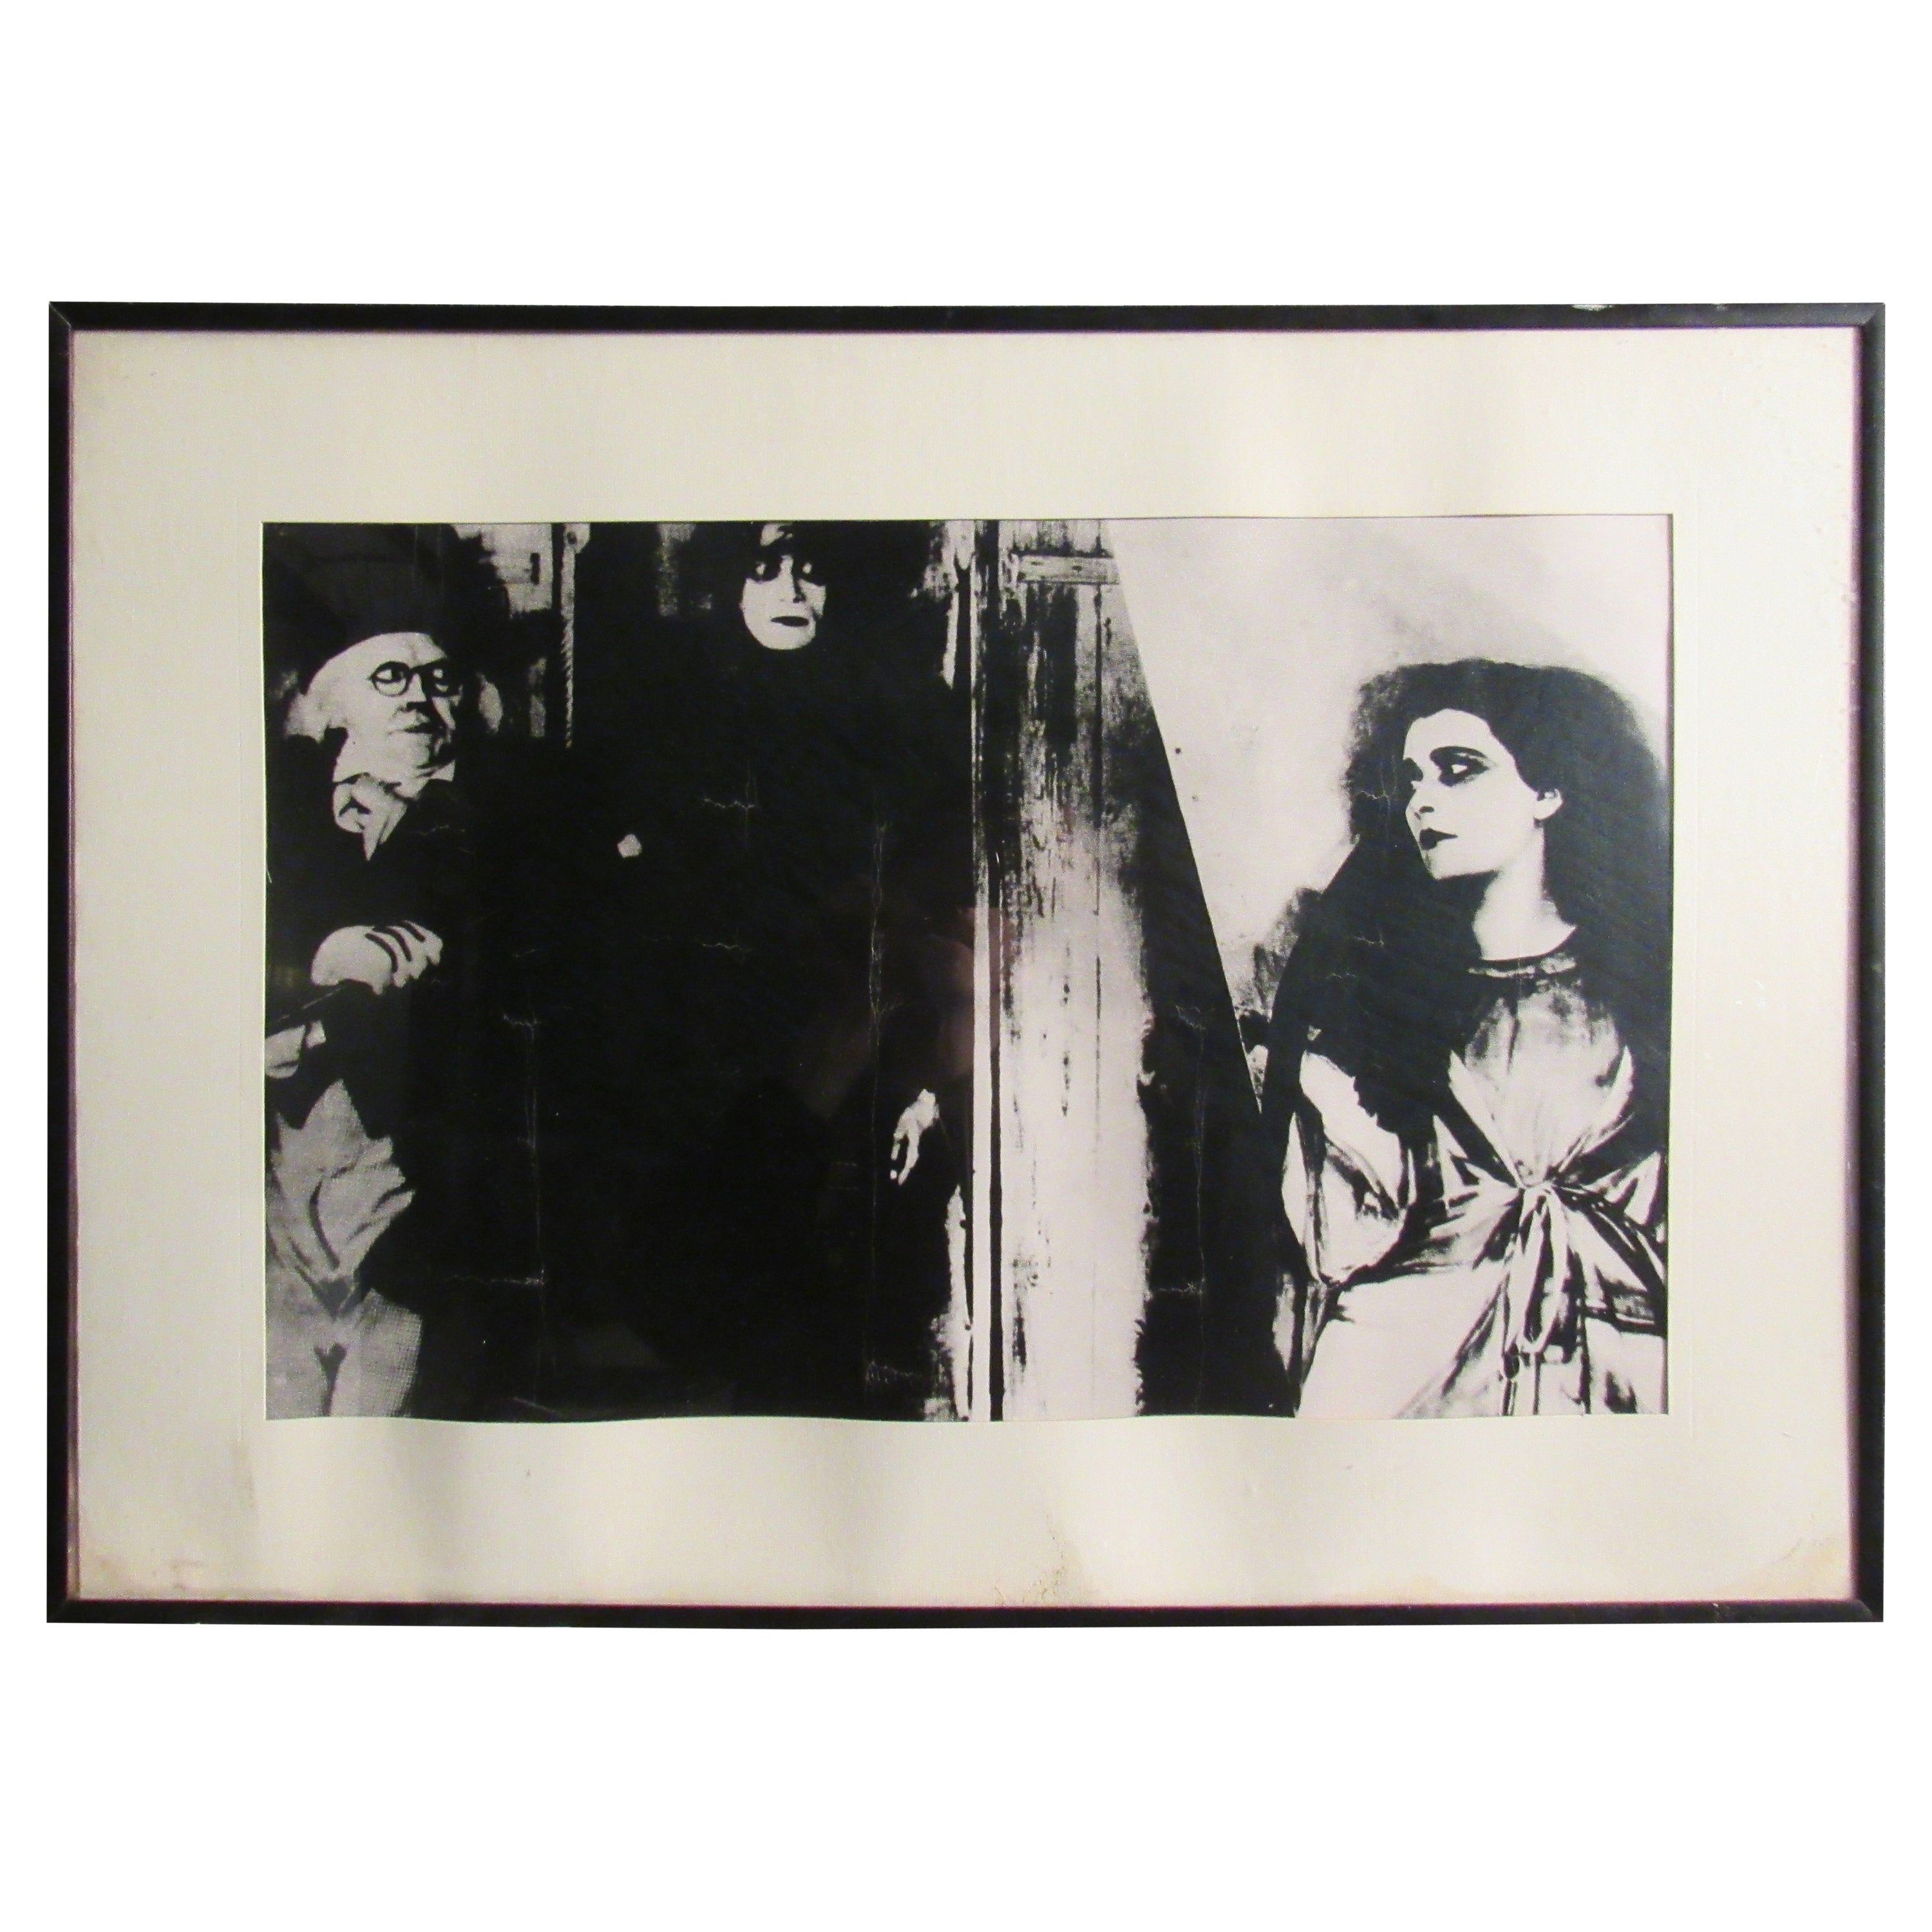 Framed "The Cabinet of Dr. Caligari" Vintage Lobby Card For Sale